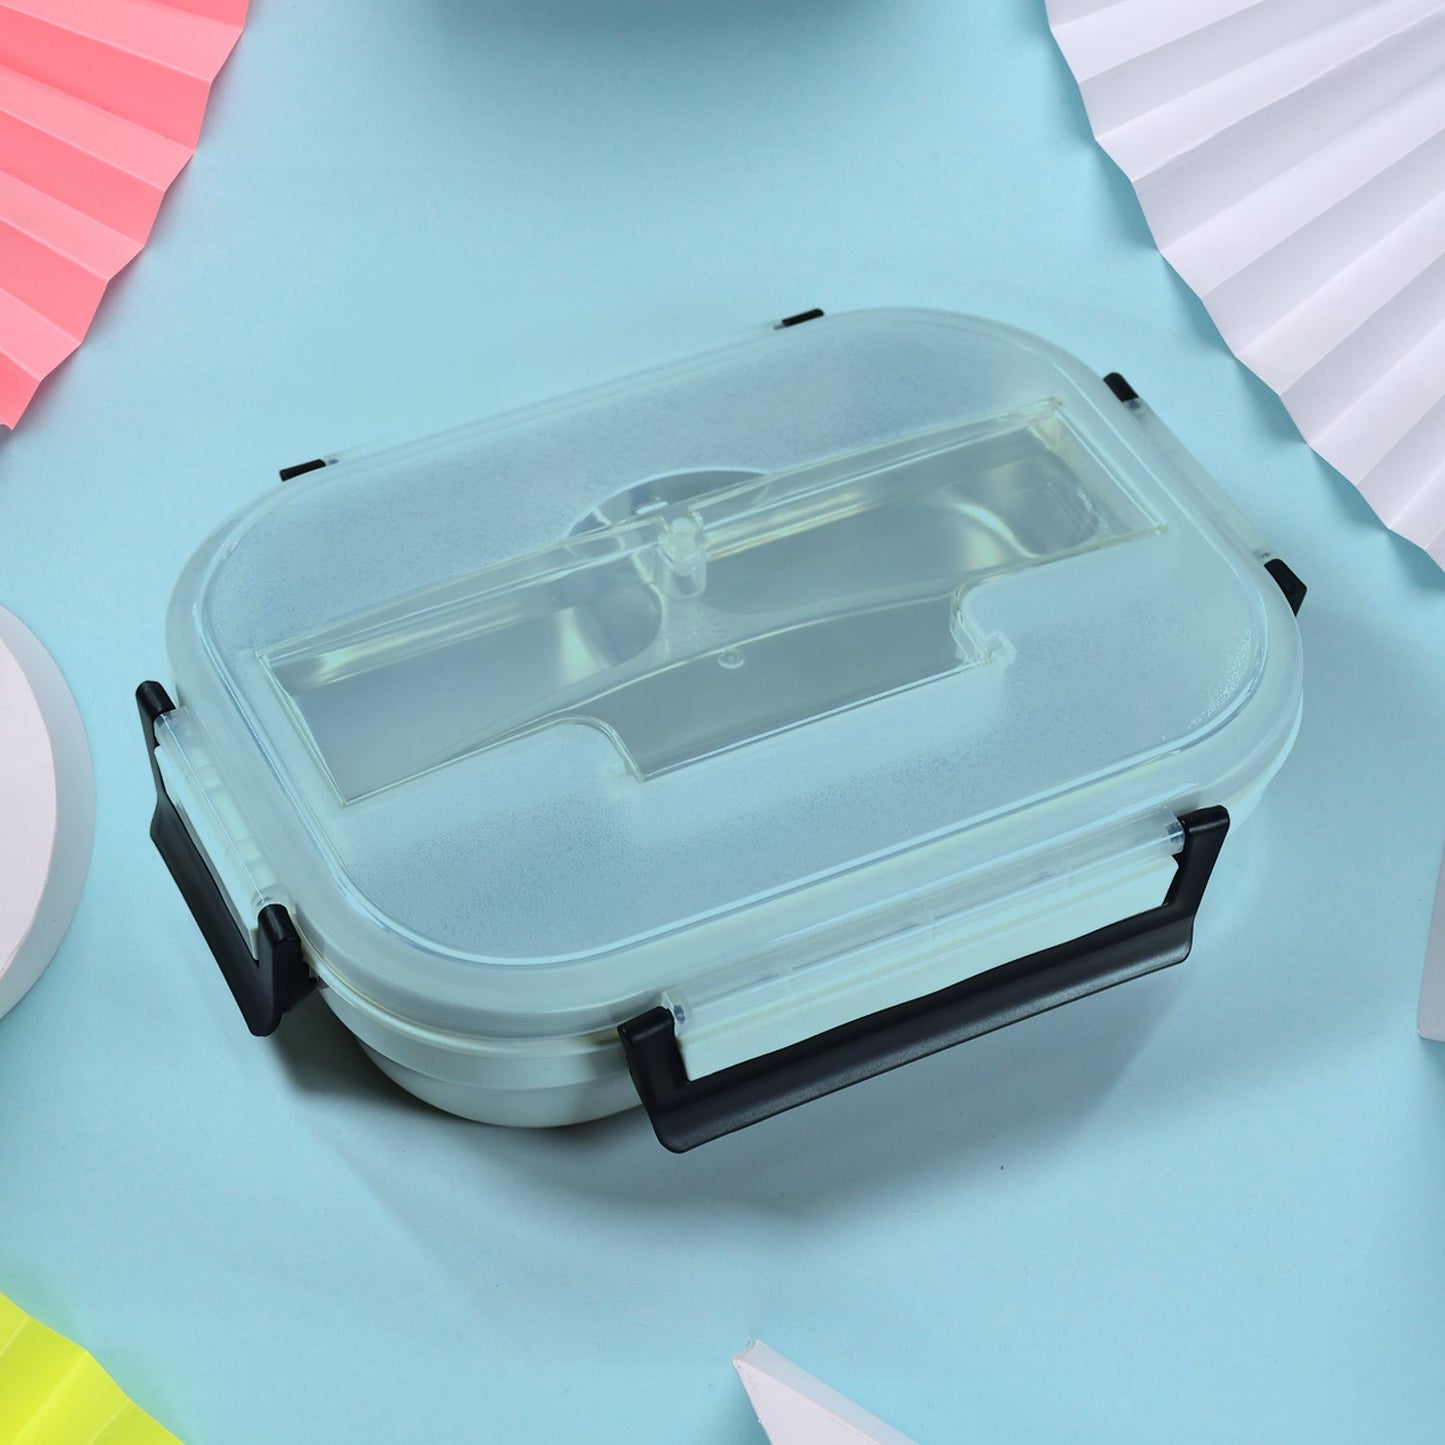 2977 Lunch Box for Kids and adults, Stainless Steel Lunch Box with 3 Compartments With spoon slot. Dukandaily